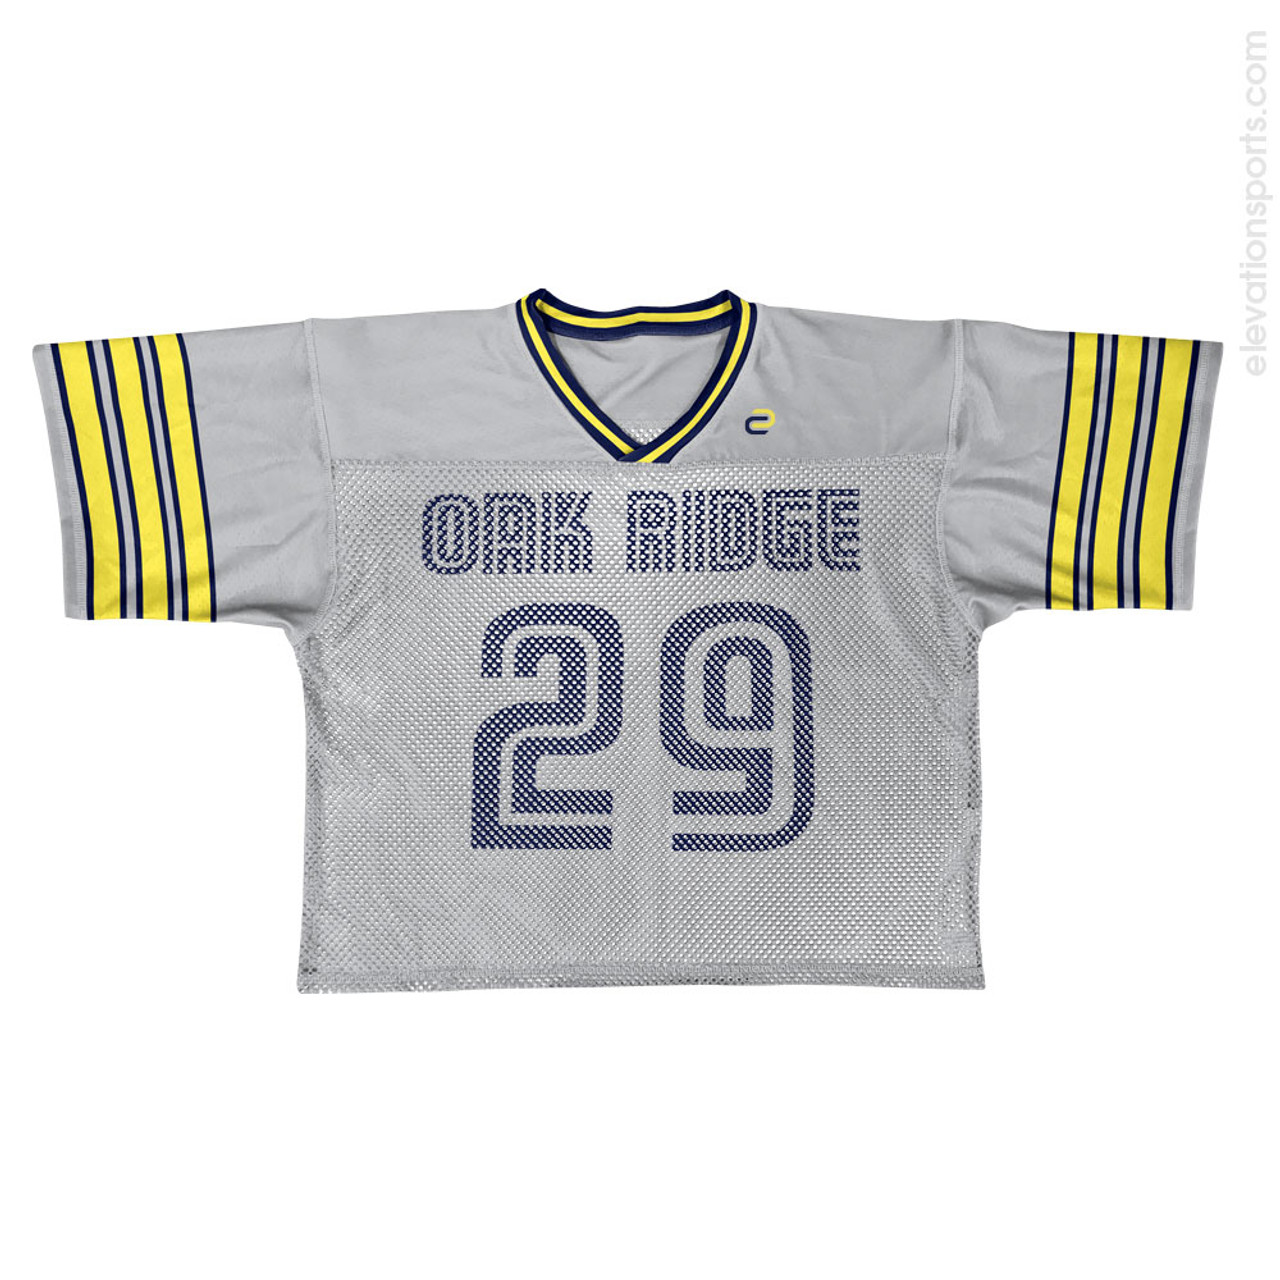 Elevation Sports - Under Armour throwback porthole mesh lacrosse jersey.  Great as your primary or alternate kit this season!